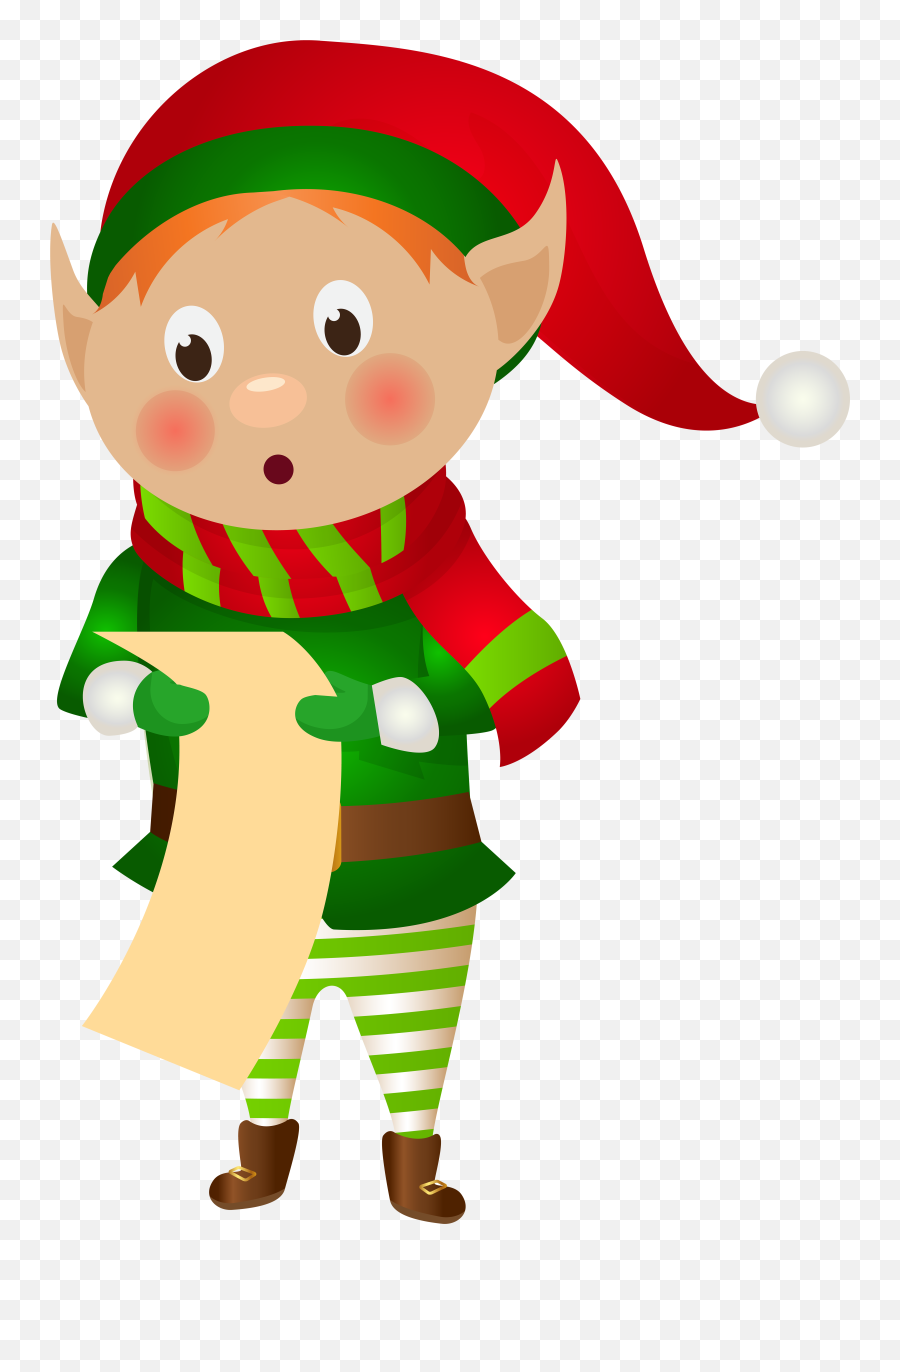 Christmas Elf Png Clip Art Gallery Yopriceville - High Christmas Elf Png Emoji,Christmas Decorations Clipart